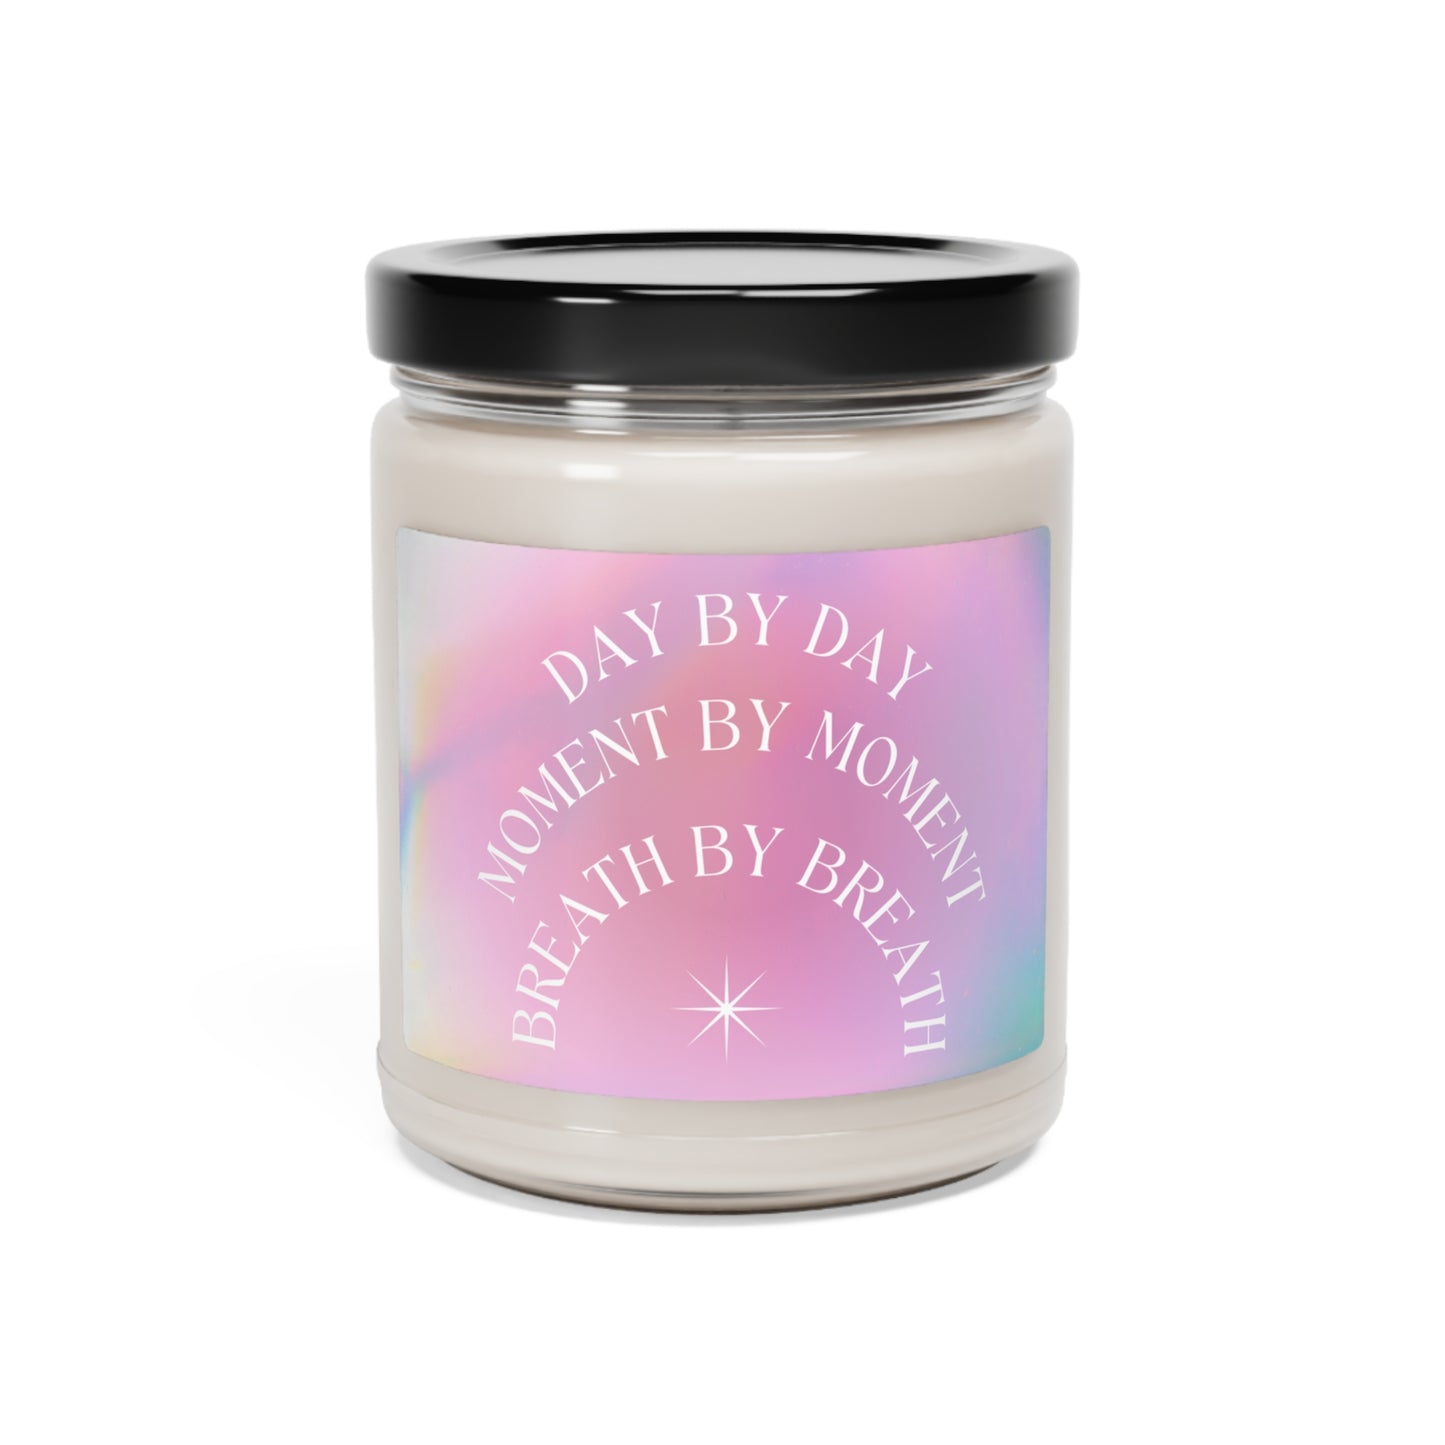 Day by Day Sea Salt & Orchid Scented Soy Self-Care Candle, 9oz